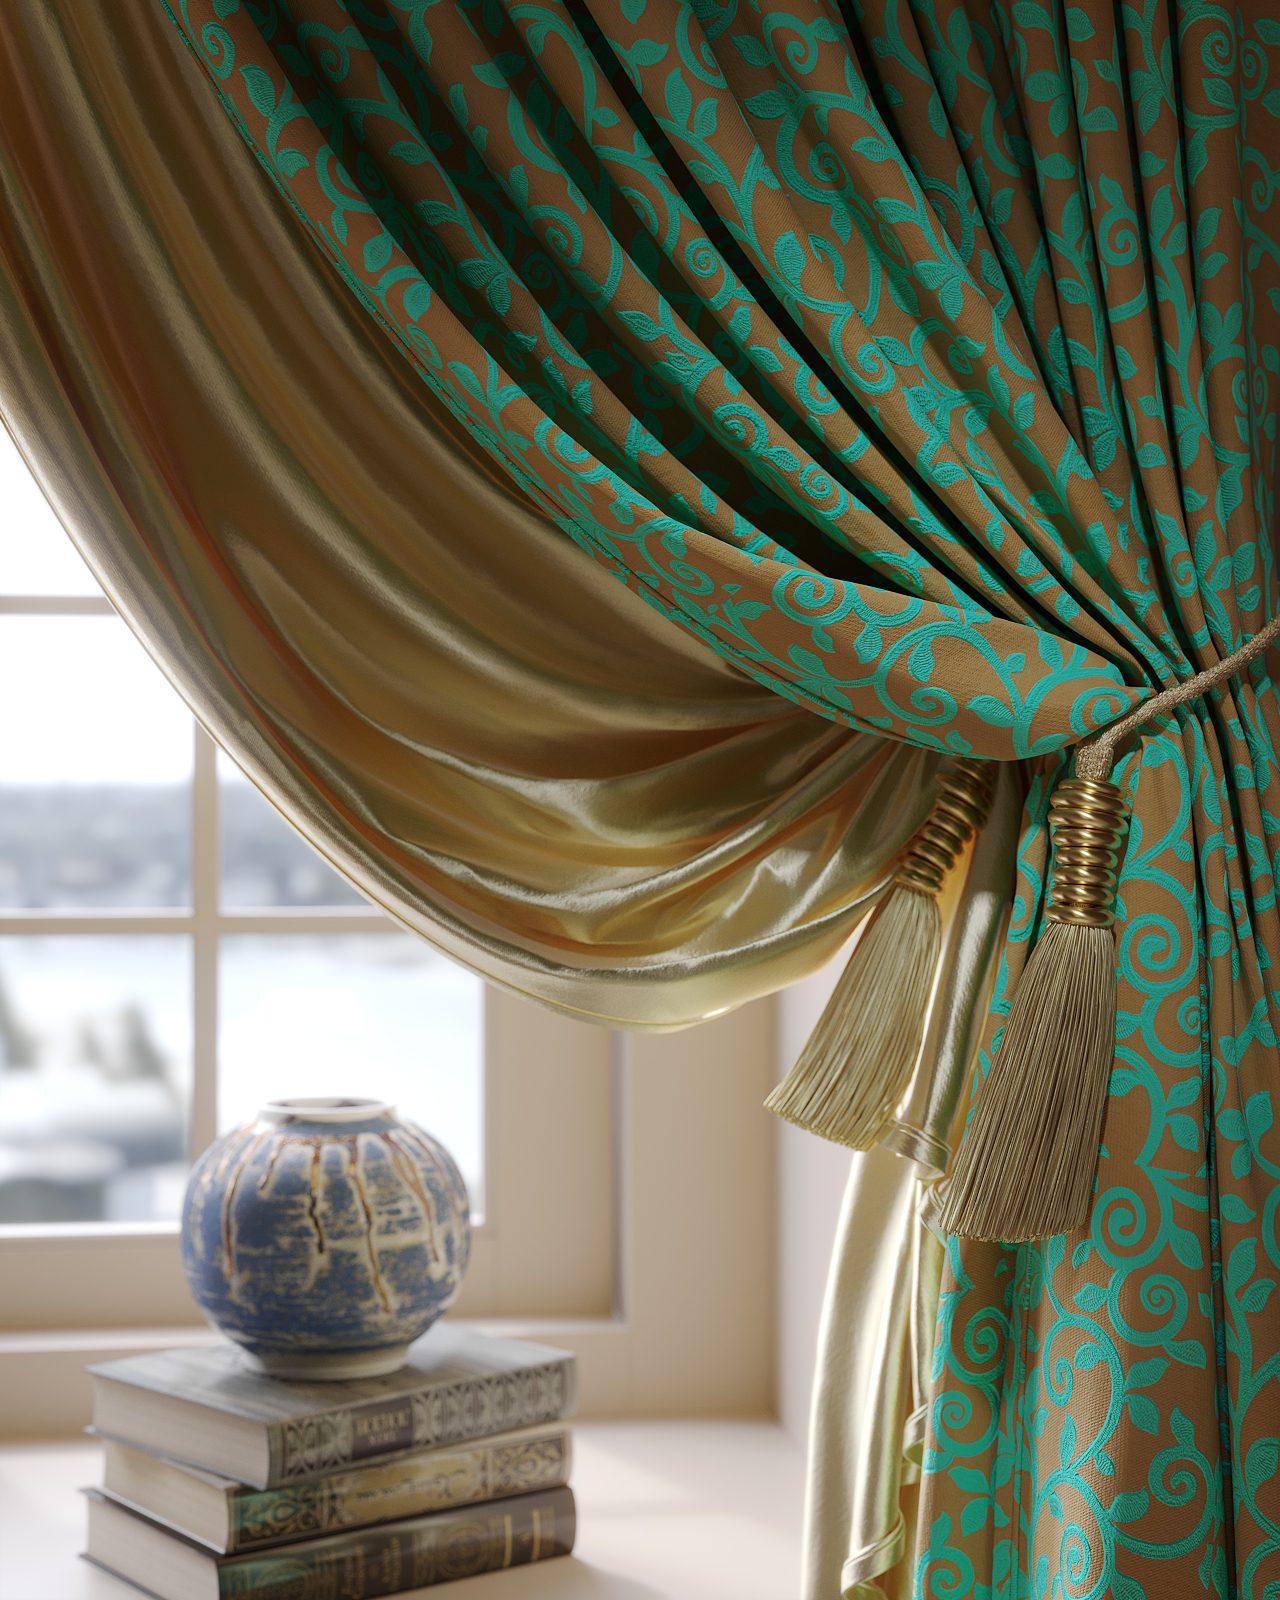 This image is 3d rendering architectural visualization. The details of the color and texture of the fabric.